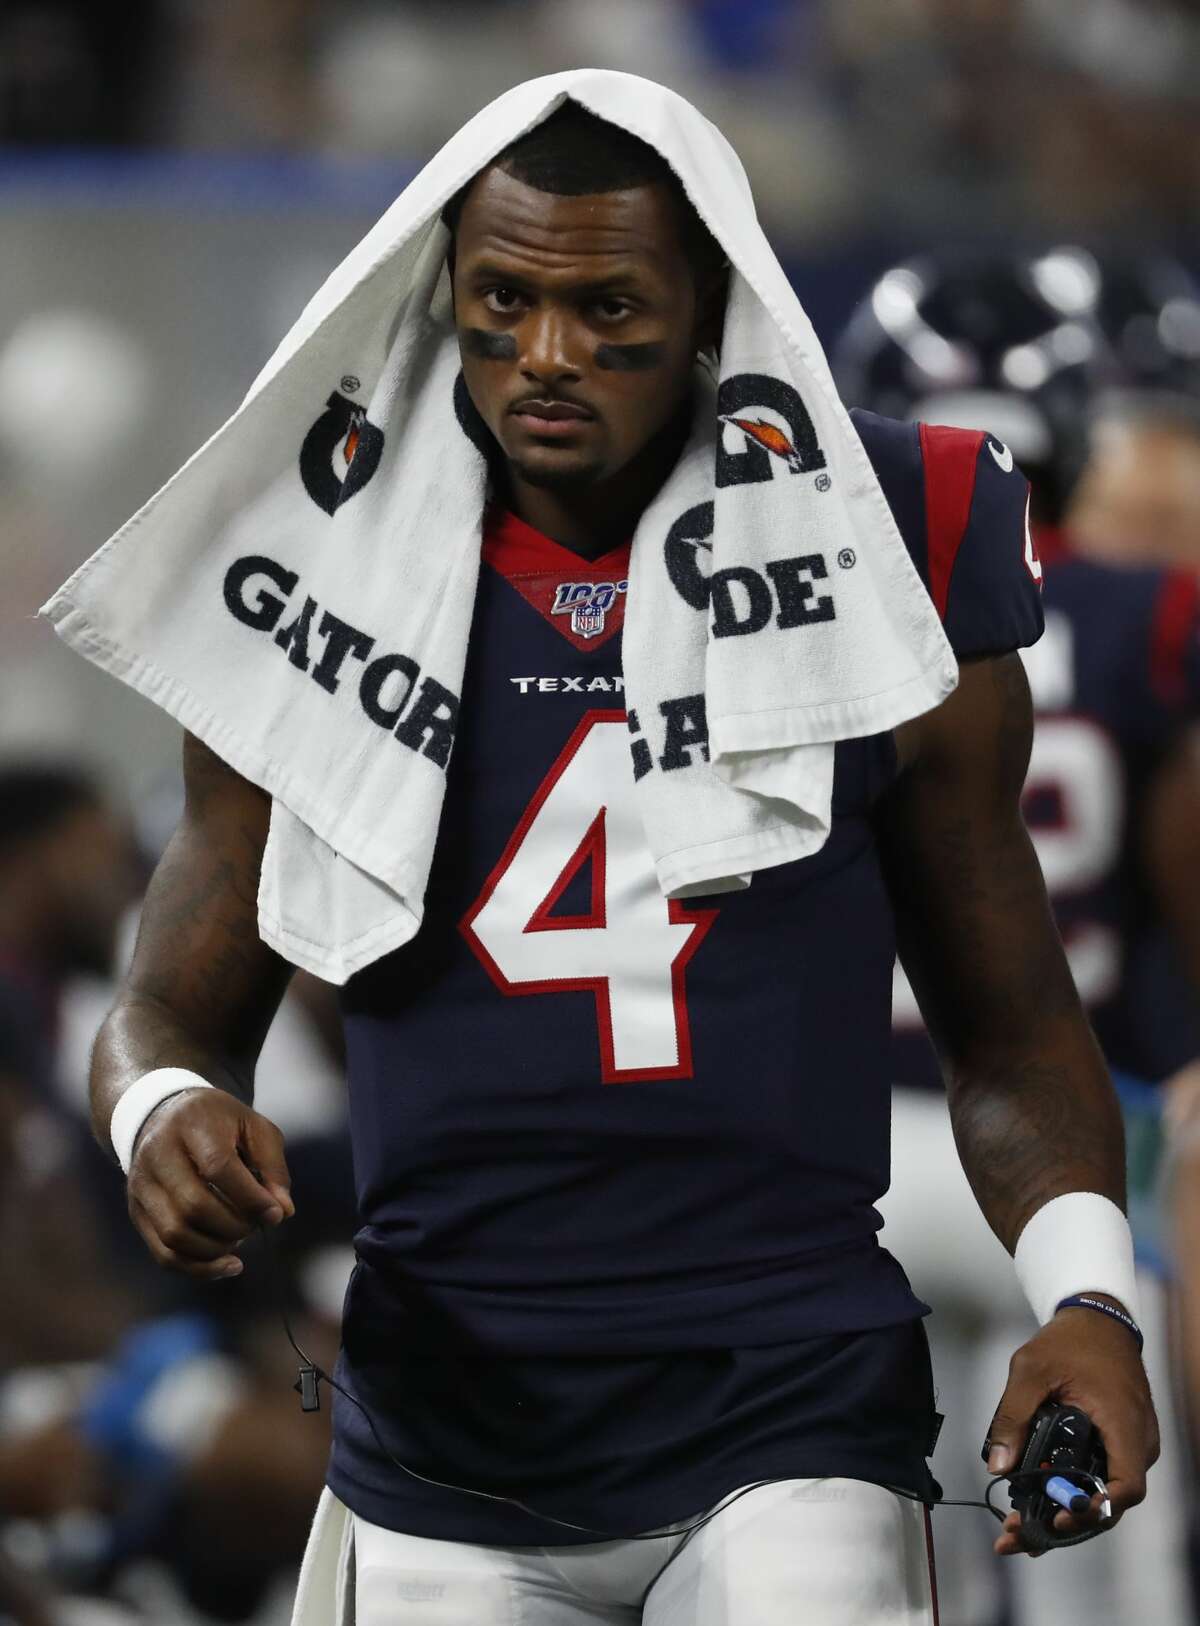 Houston Texans quarterback Deshaun Watson walks along the sidelines during the second quarter of an NFL preseason football game against the Dallas Cowboys at AT&T Stadium on Saturday, Aug. 24, 2019, in Arlington, Texas.